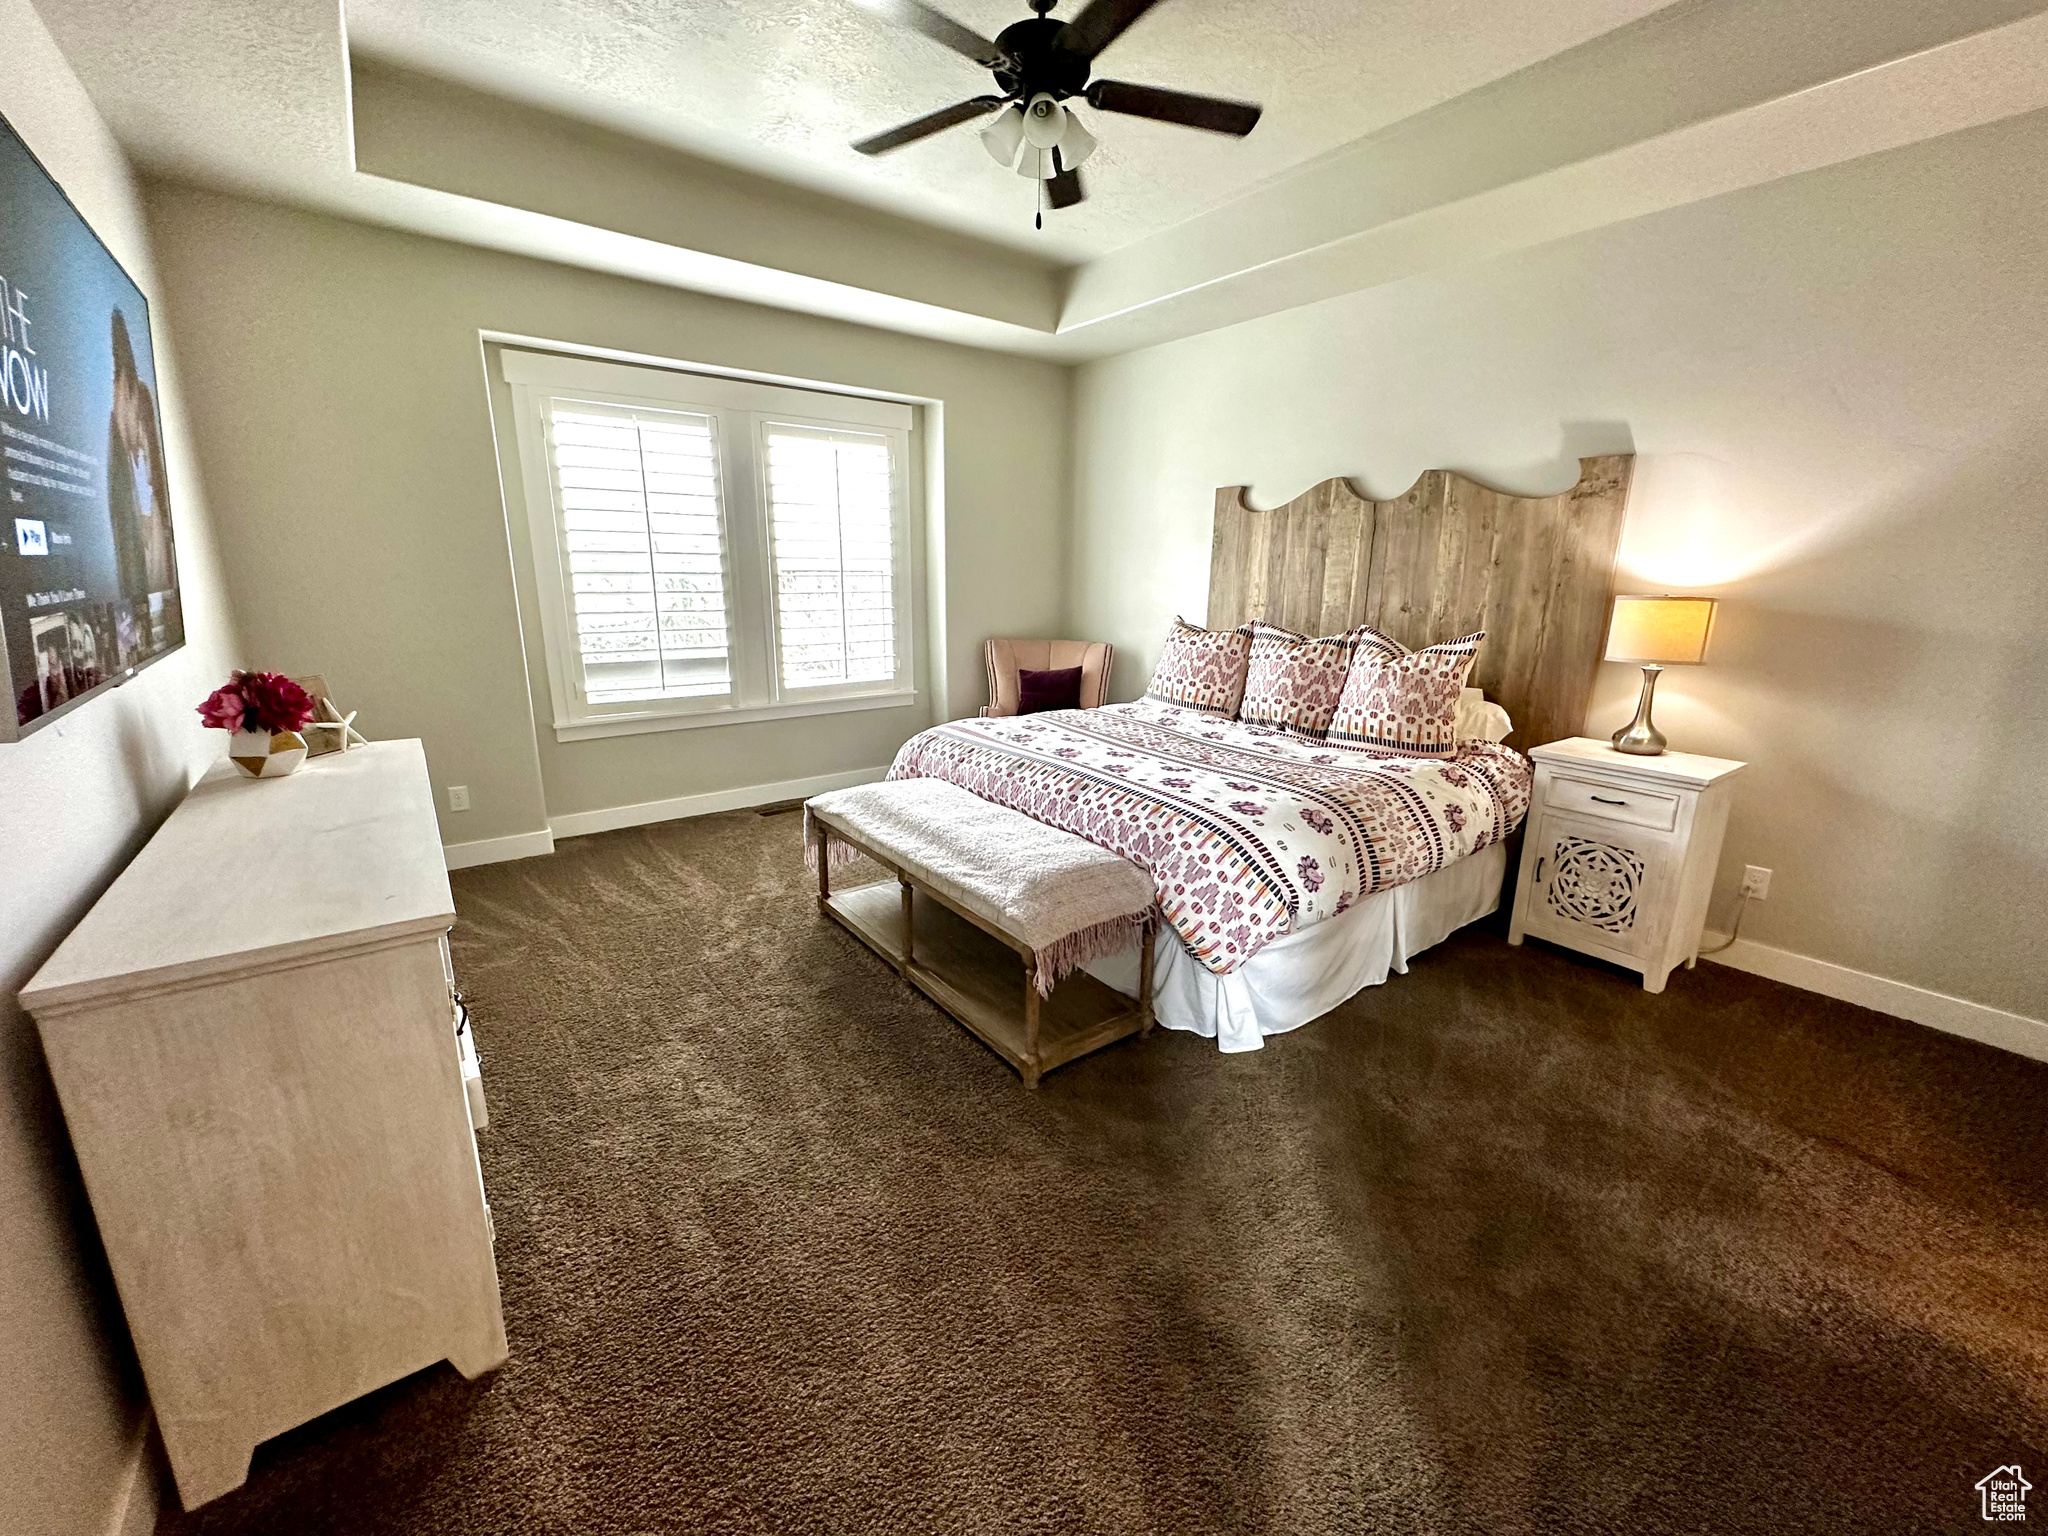 Carpeted bedroom featuring ceiling fan and a raised ceiling